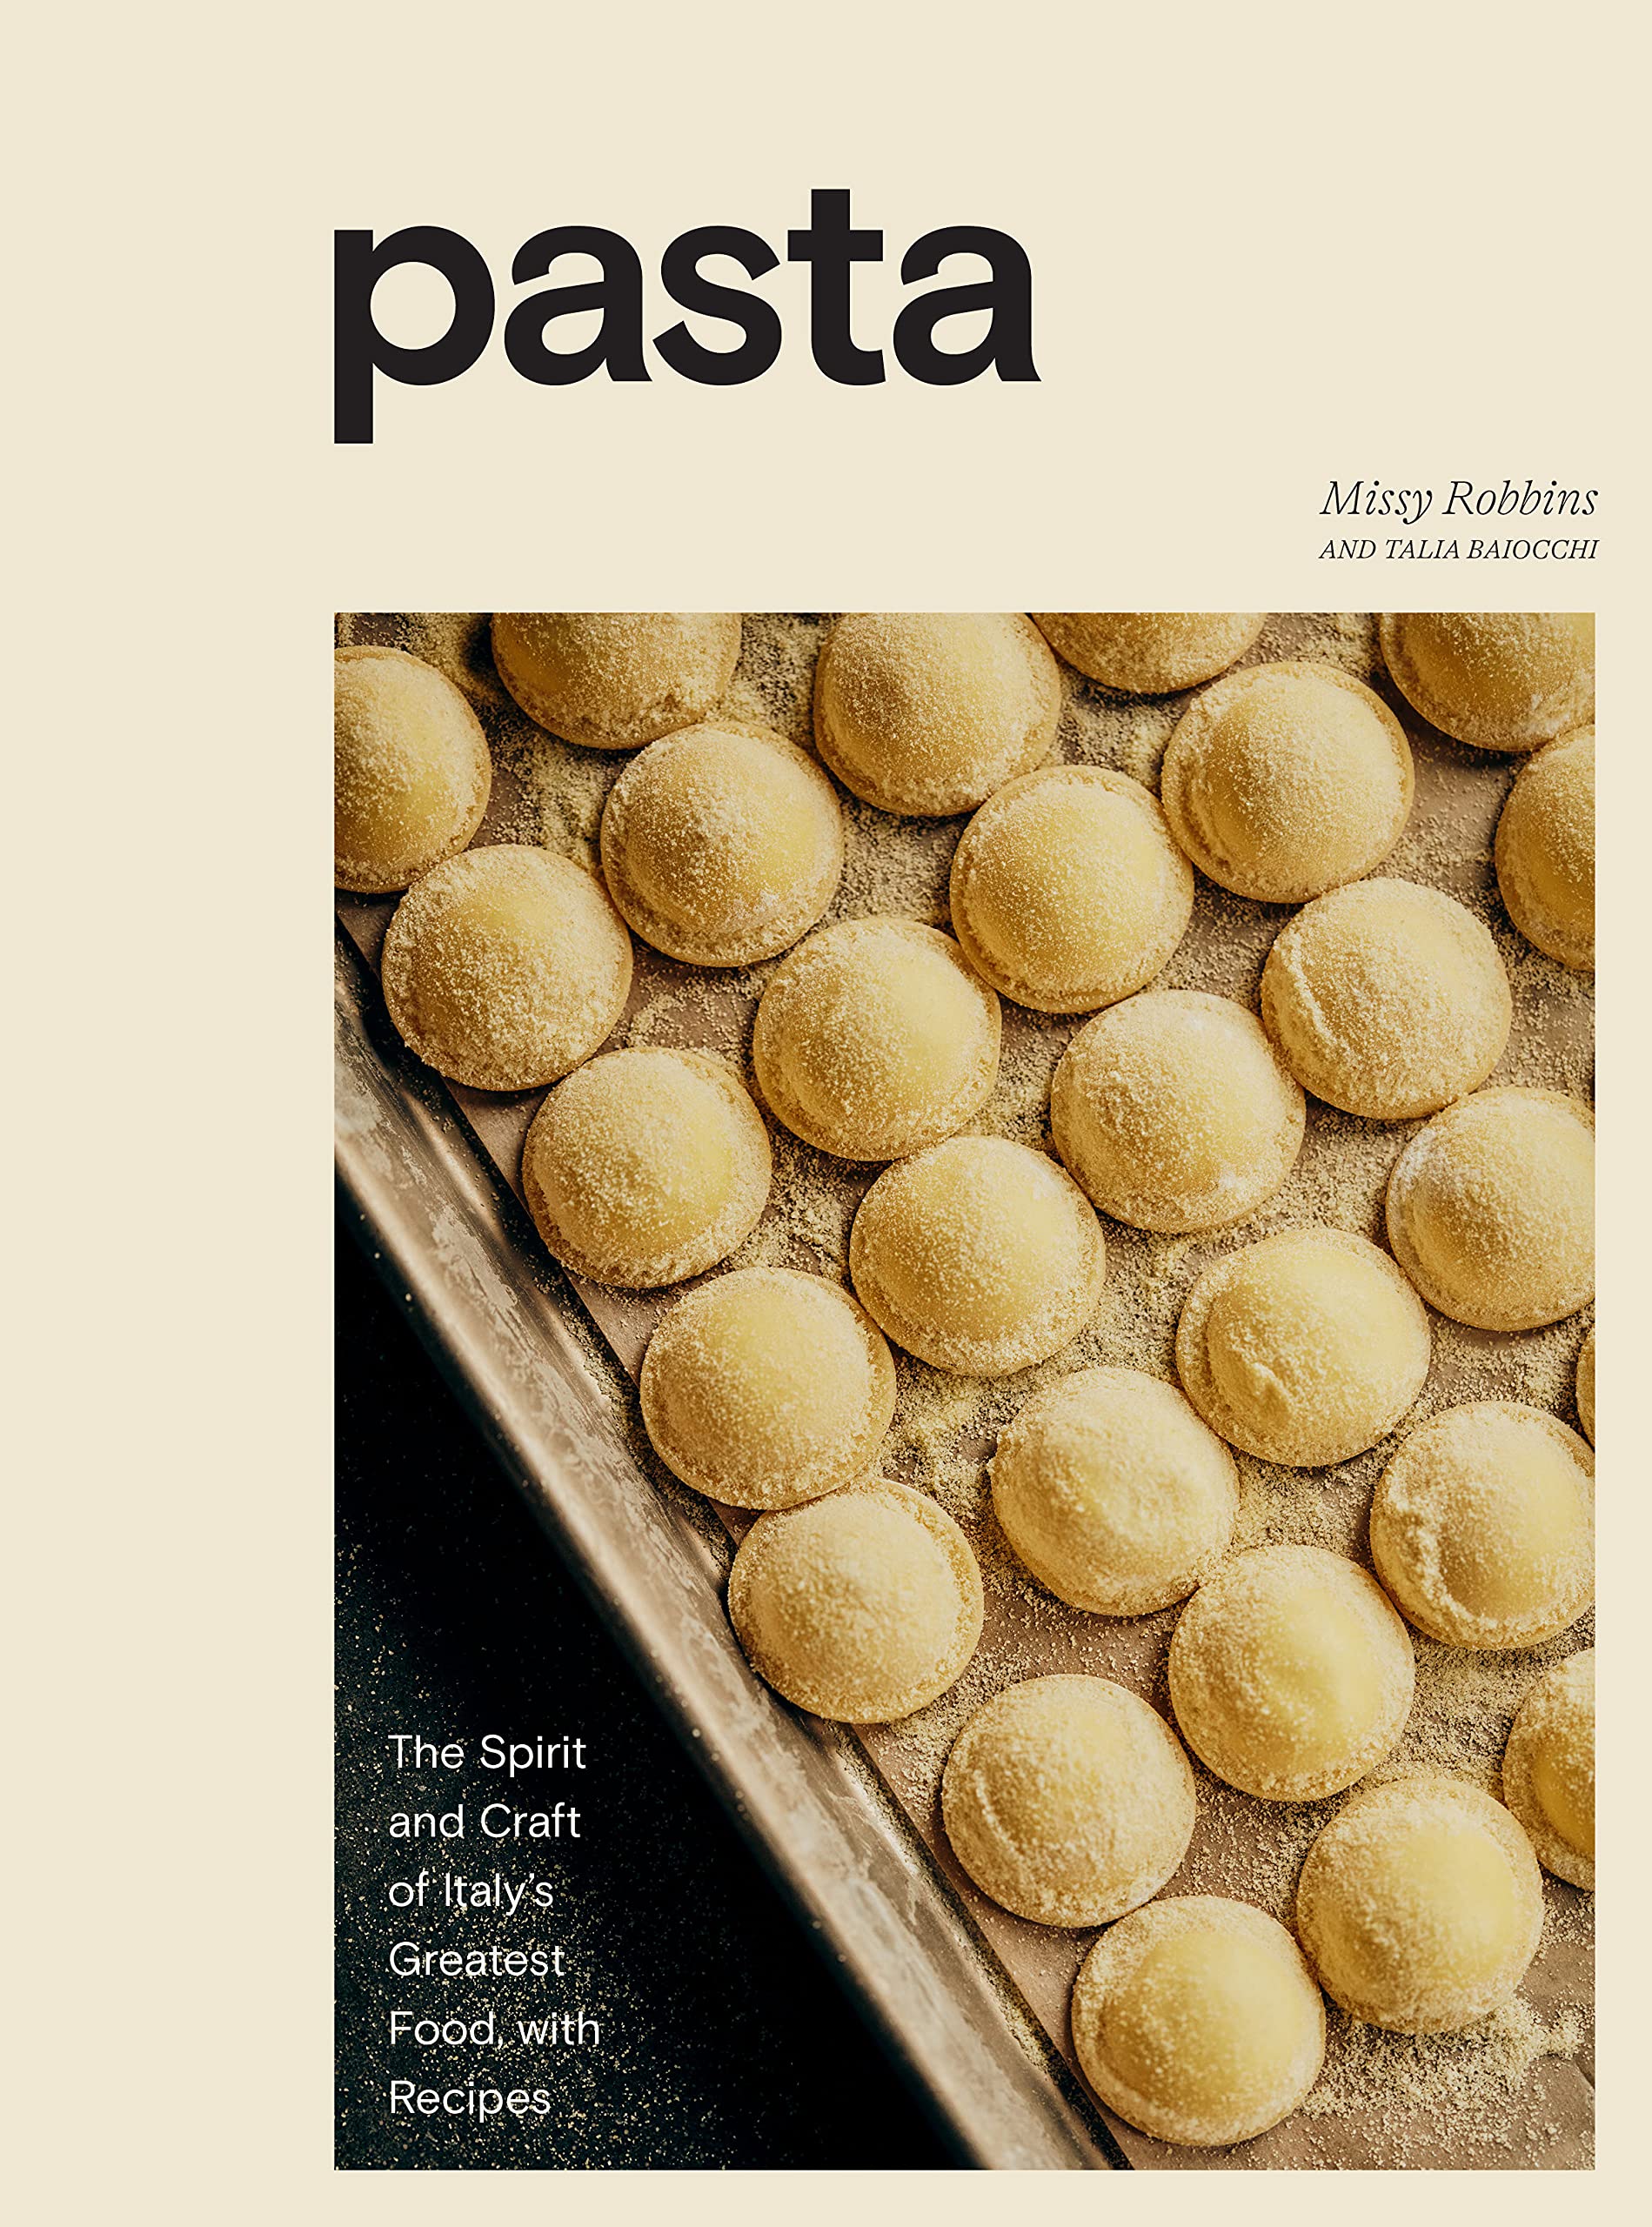 Pasta: The Spirit and Craft of Italy's Greatest Food, with Recipes (Missy Robbins)